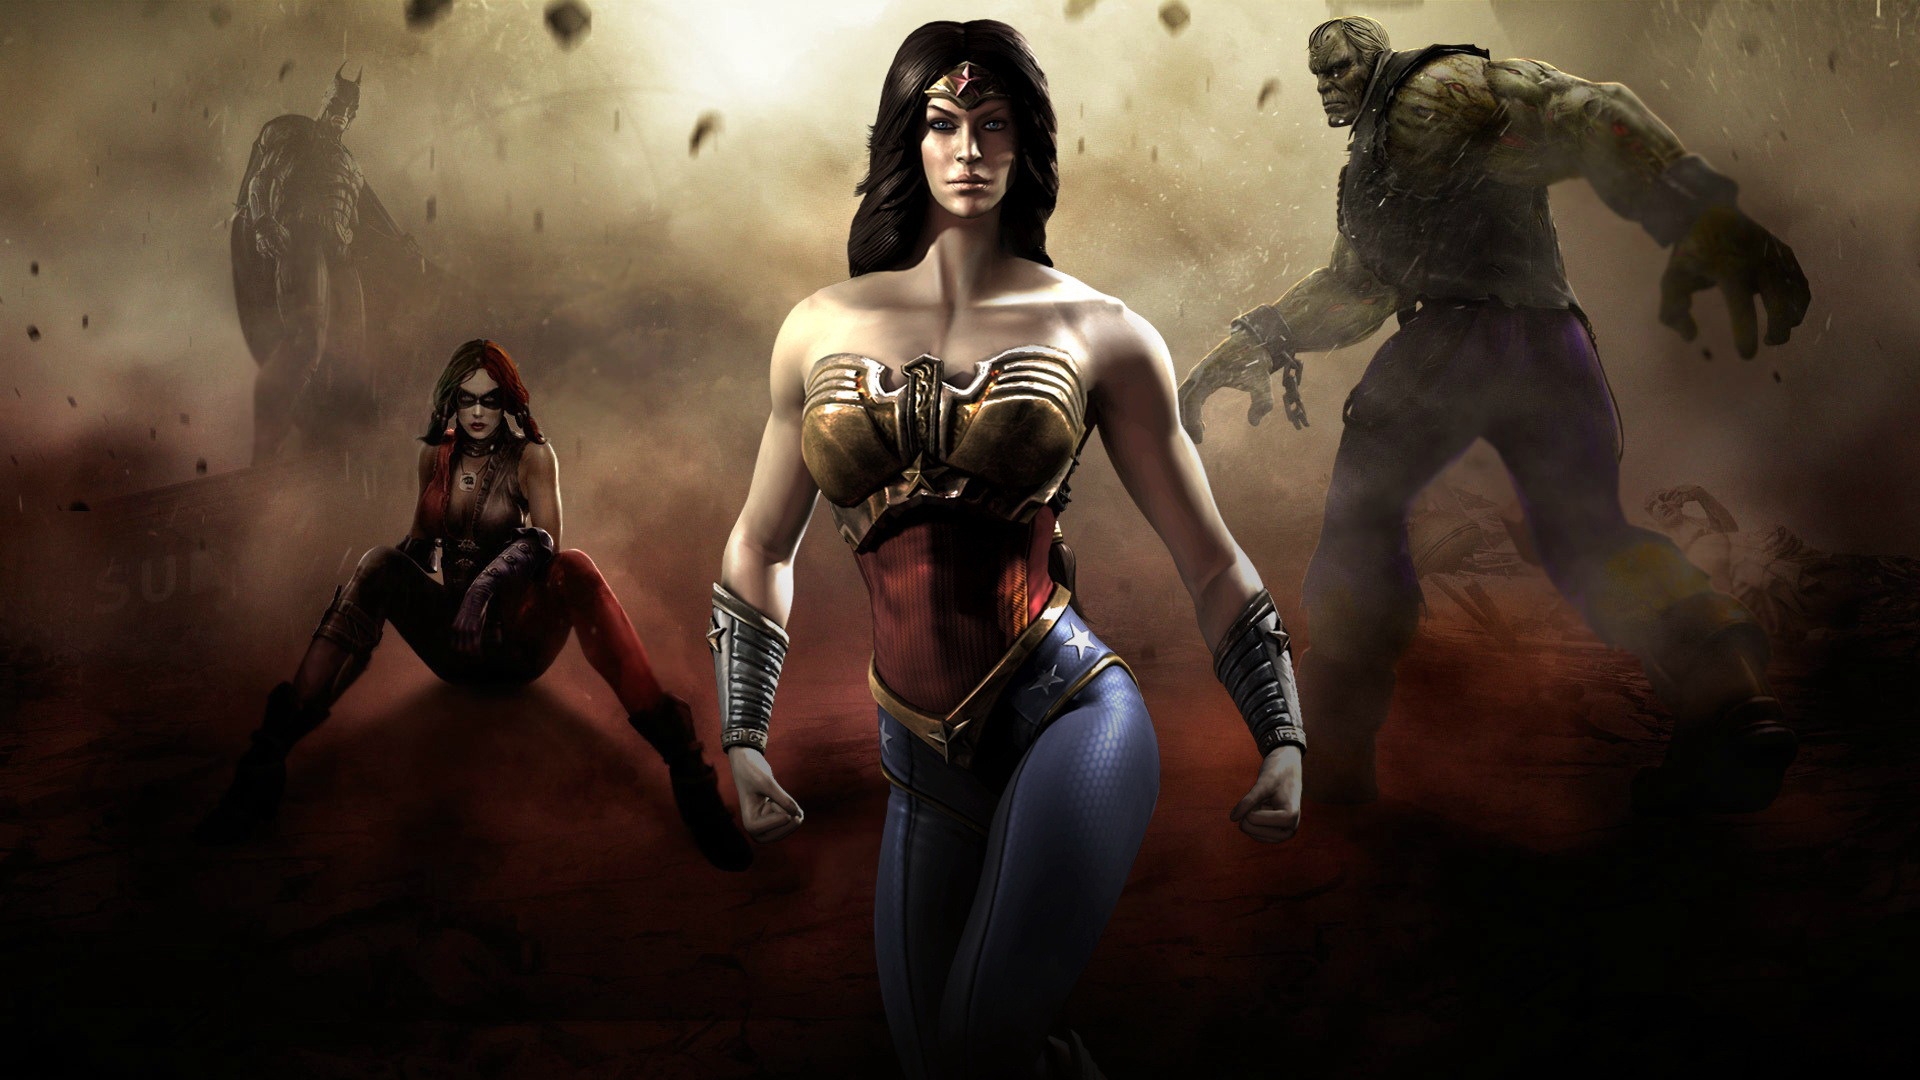 Injustice Heroes for 1920 x 1080 HDTV 1080p resolution